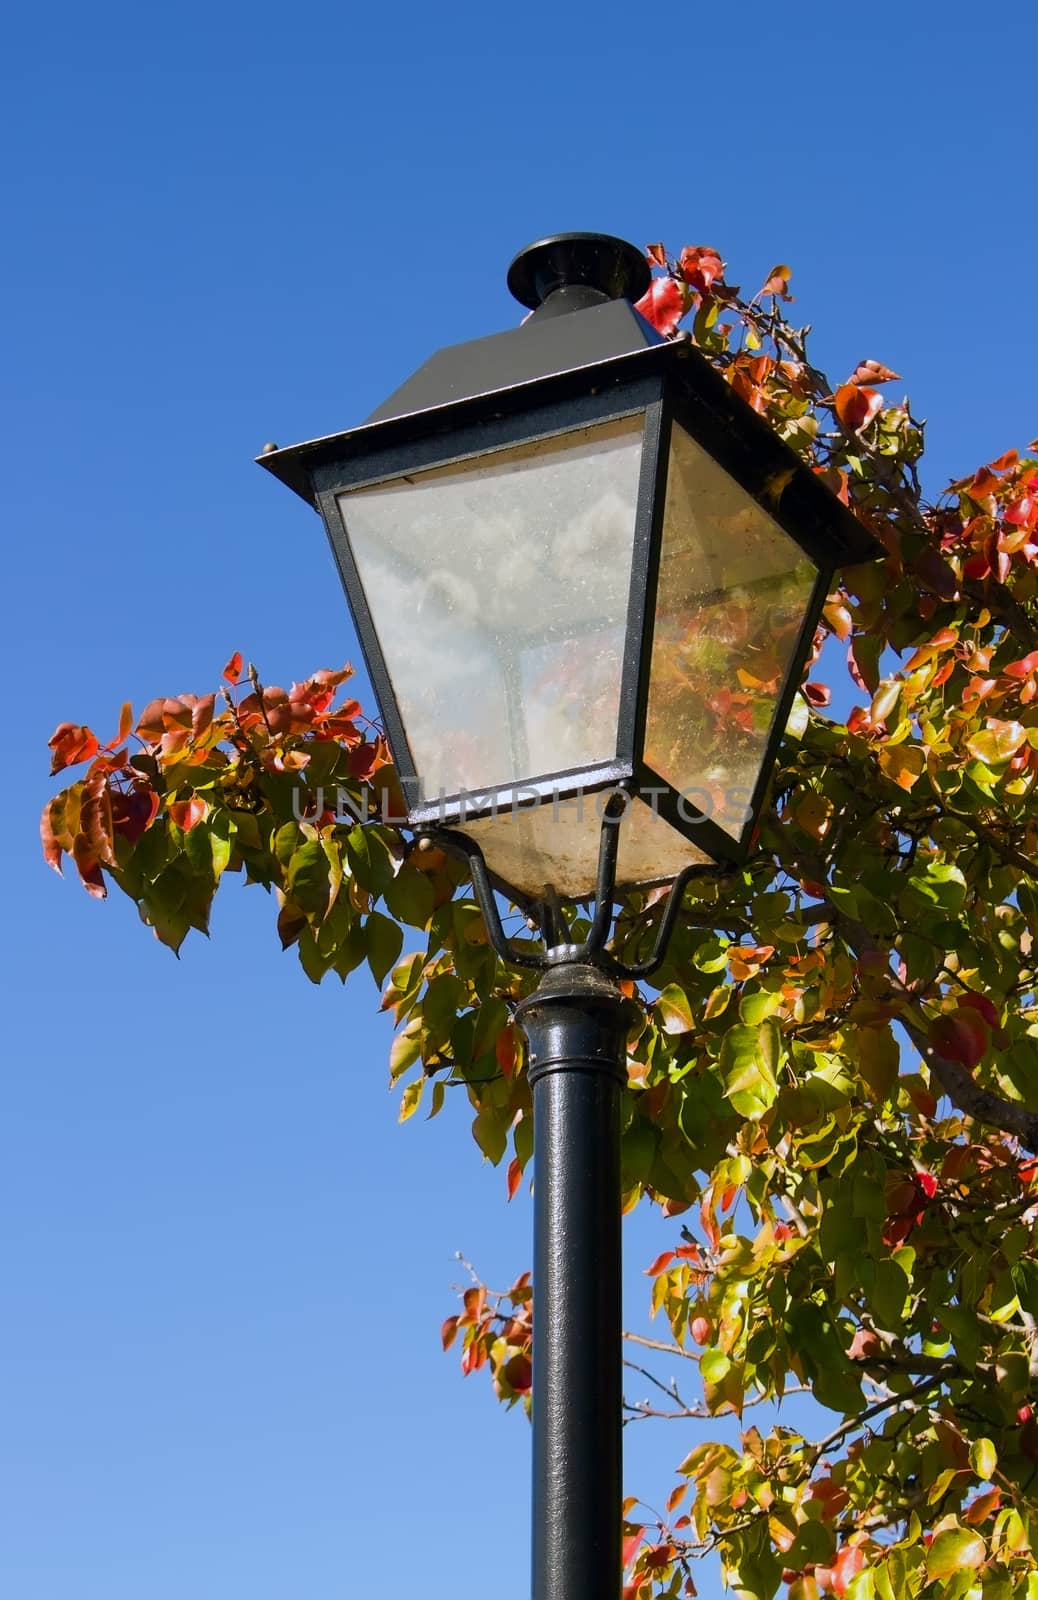 Vertical shot of ornate street light with red and green tree in background